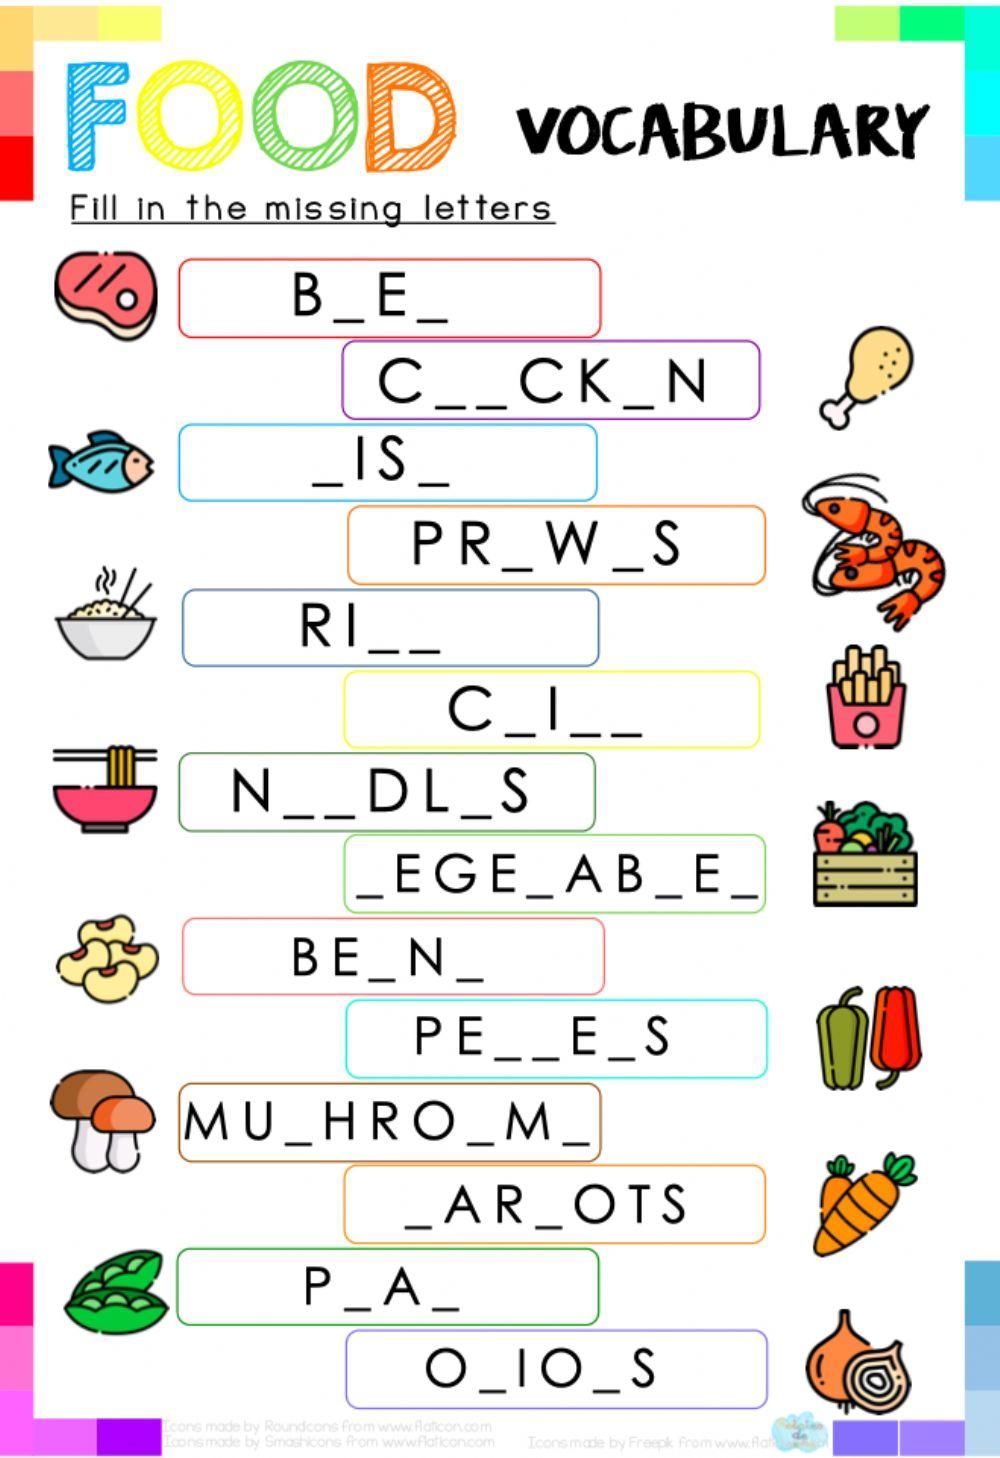 Fill in the missing letter: Vocabulary food